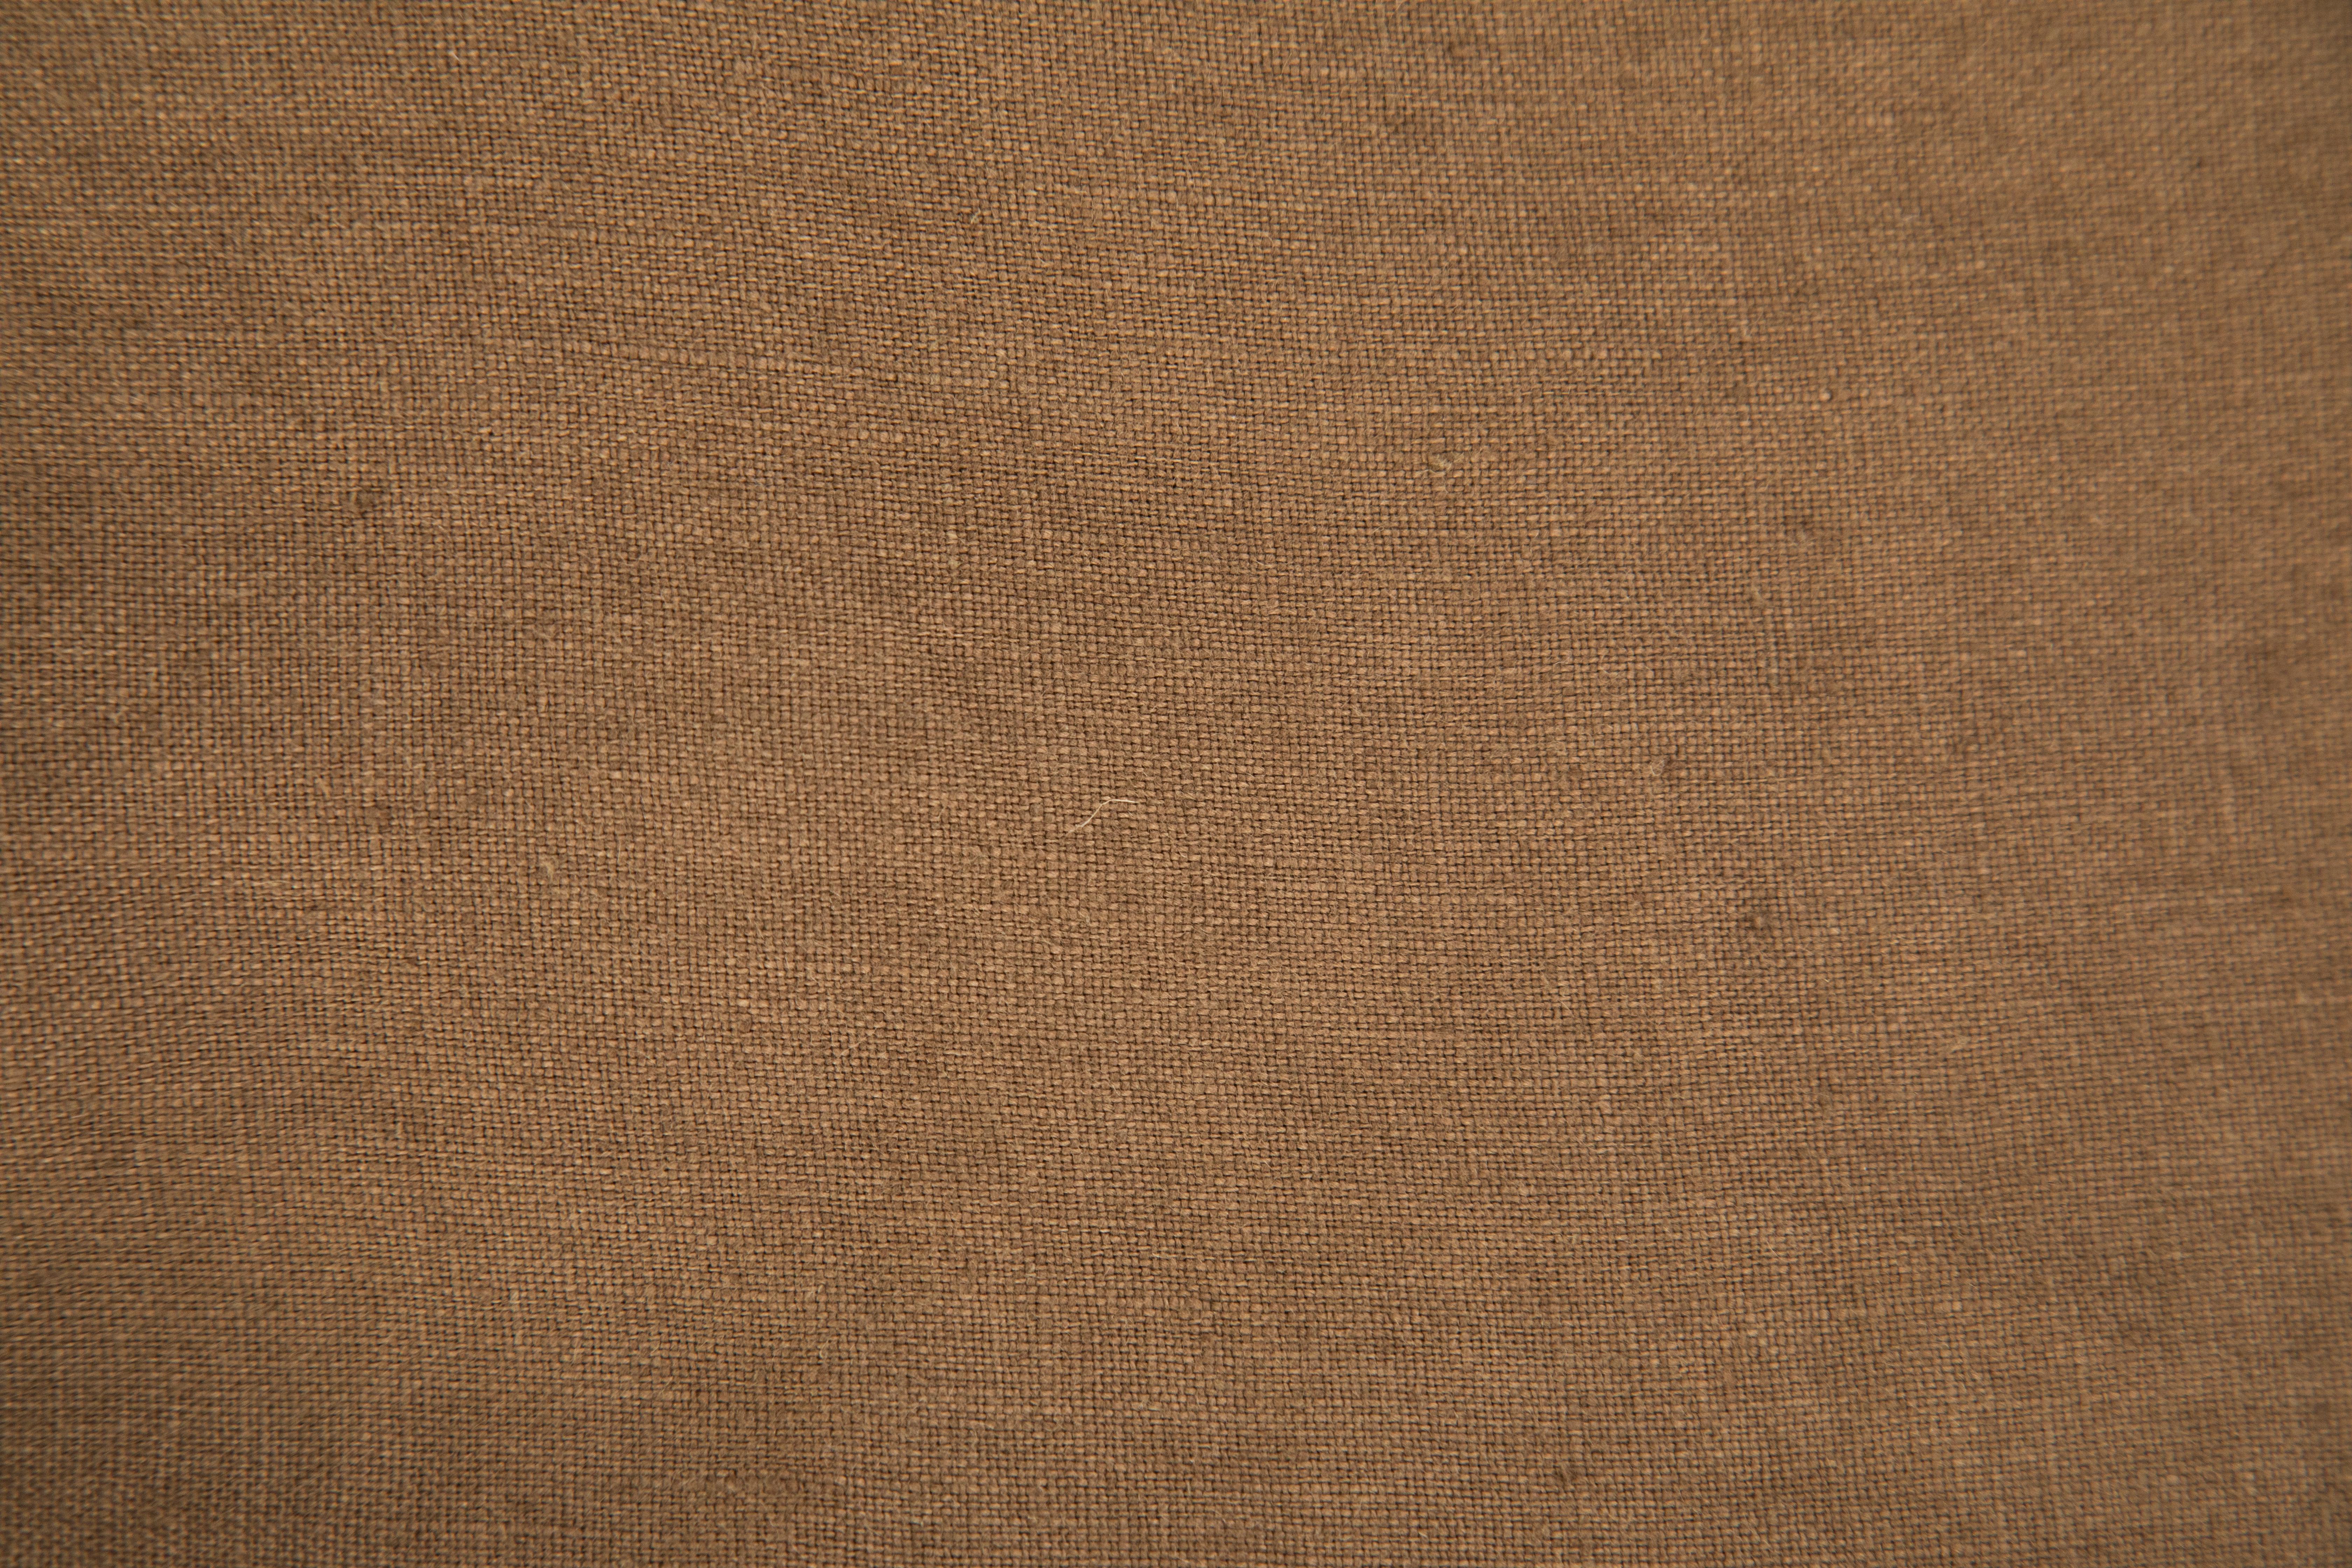 Brown Cotton Linen Seamless Texture Stock Photo - Download Image